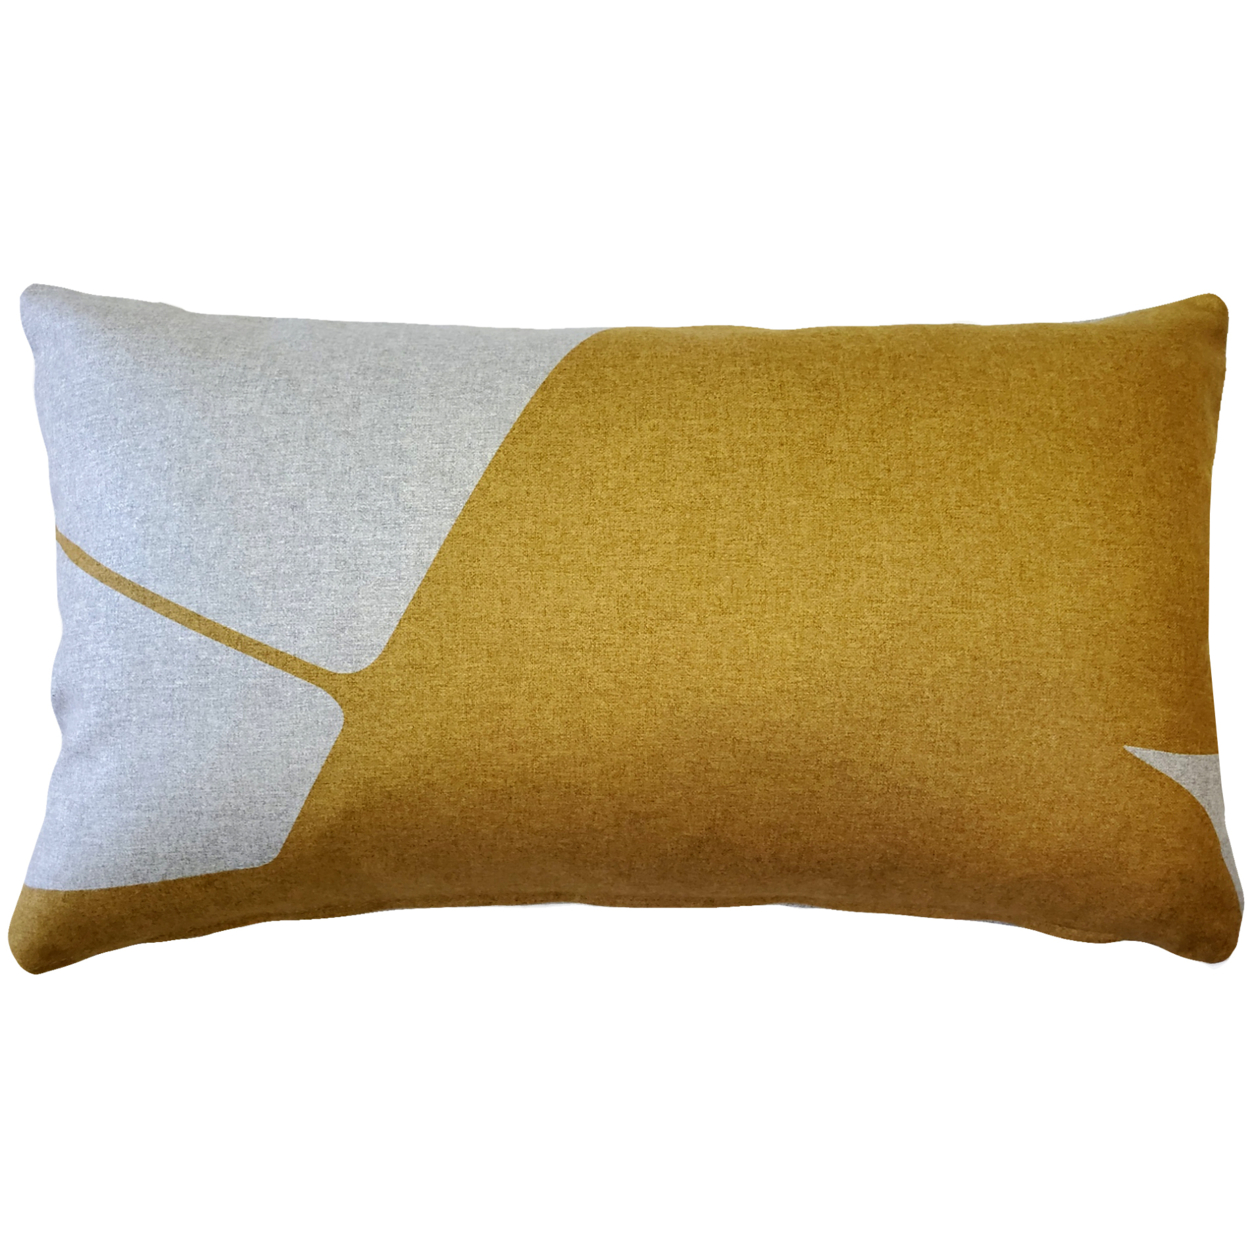 Boketto Renaissance Gold Throw Pillow 12x19 Inches Square, Complete Pillow with Polyfill Pillow Insert